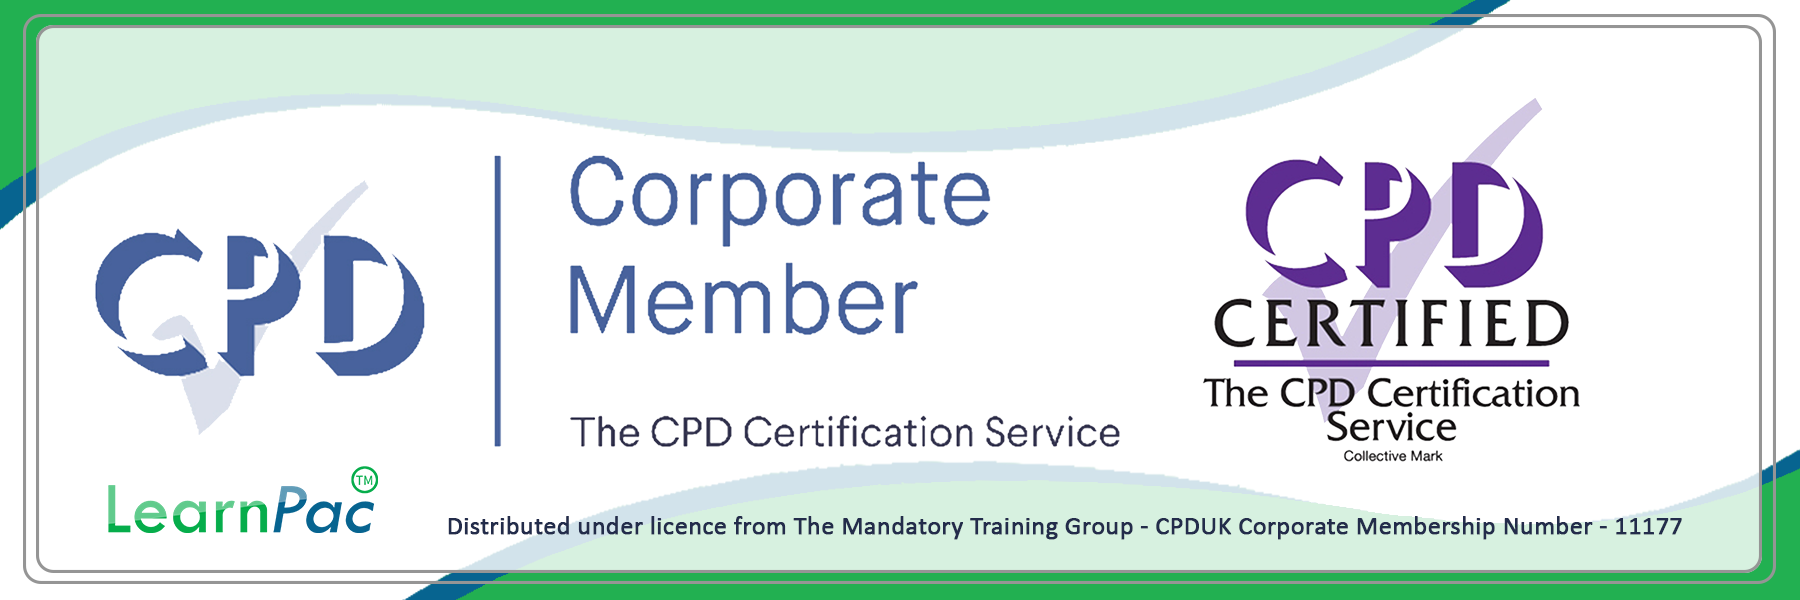 Role of a Treatment Coordinator - Online Training Course - CPD Accredited - LearnPac Systems UK -